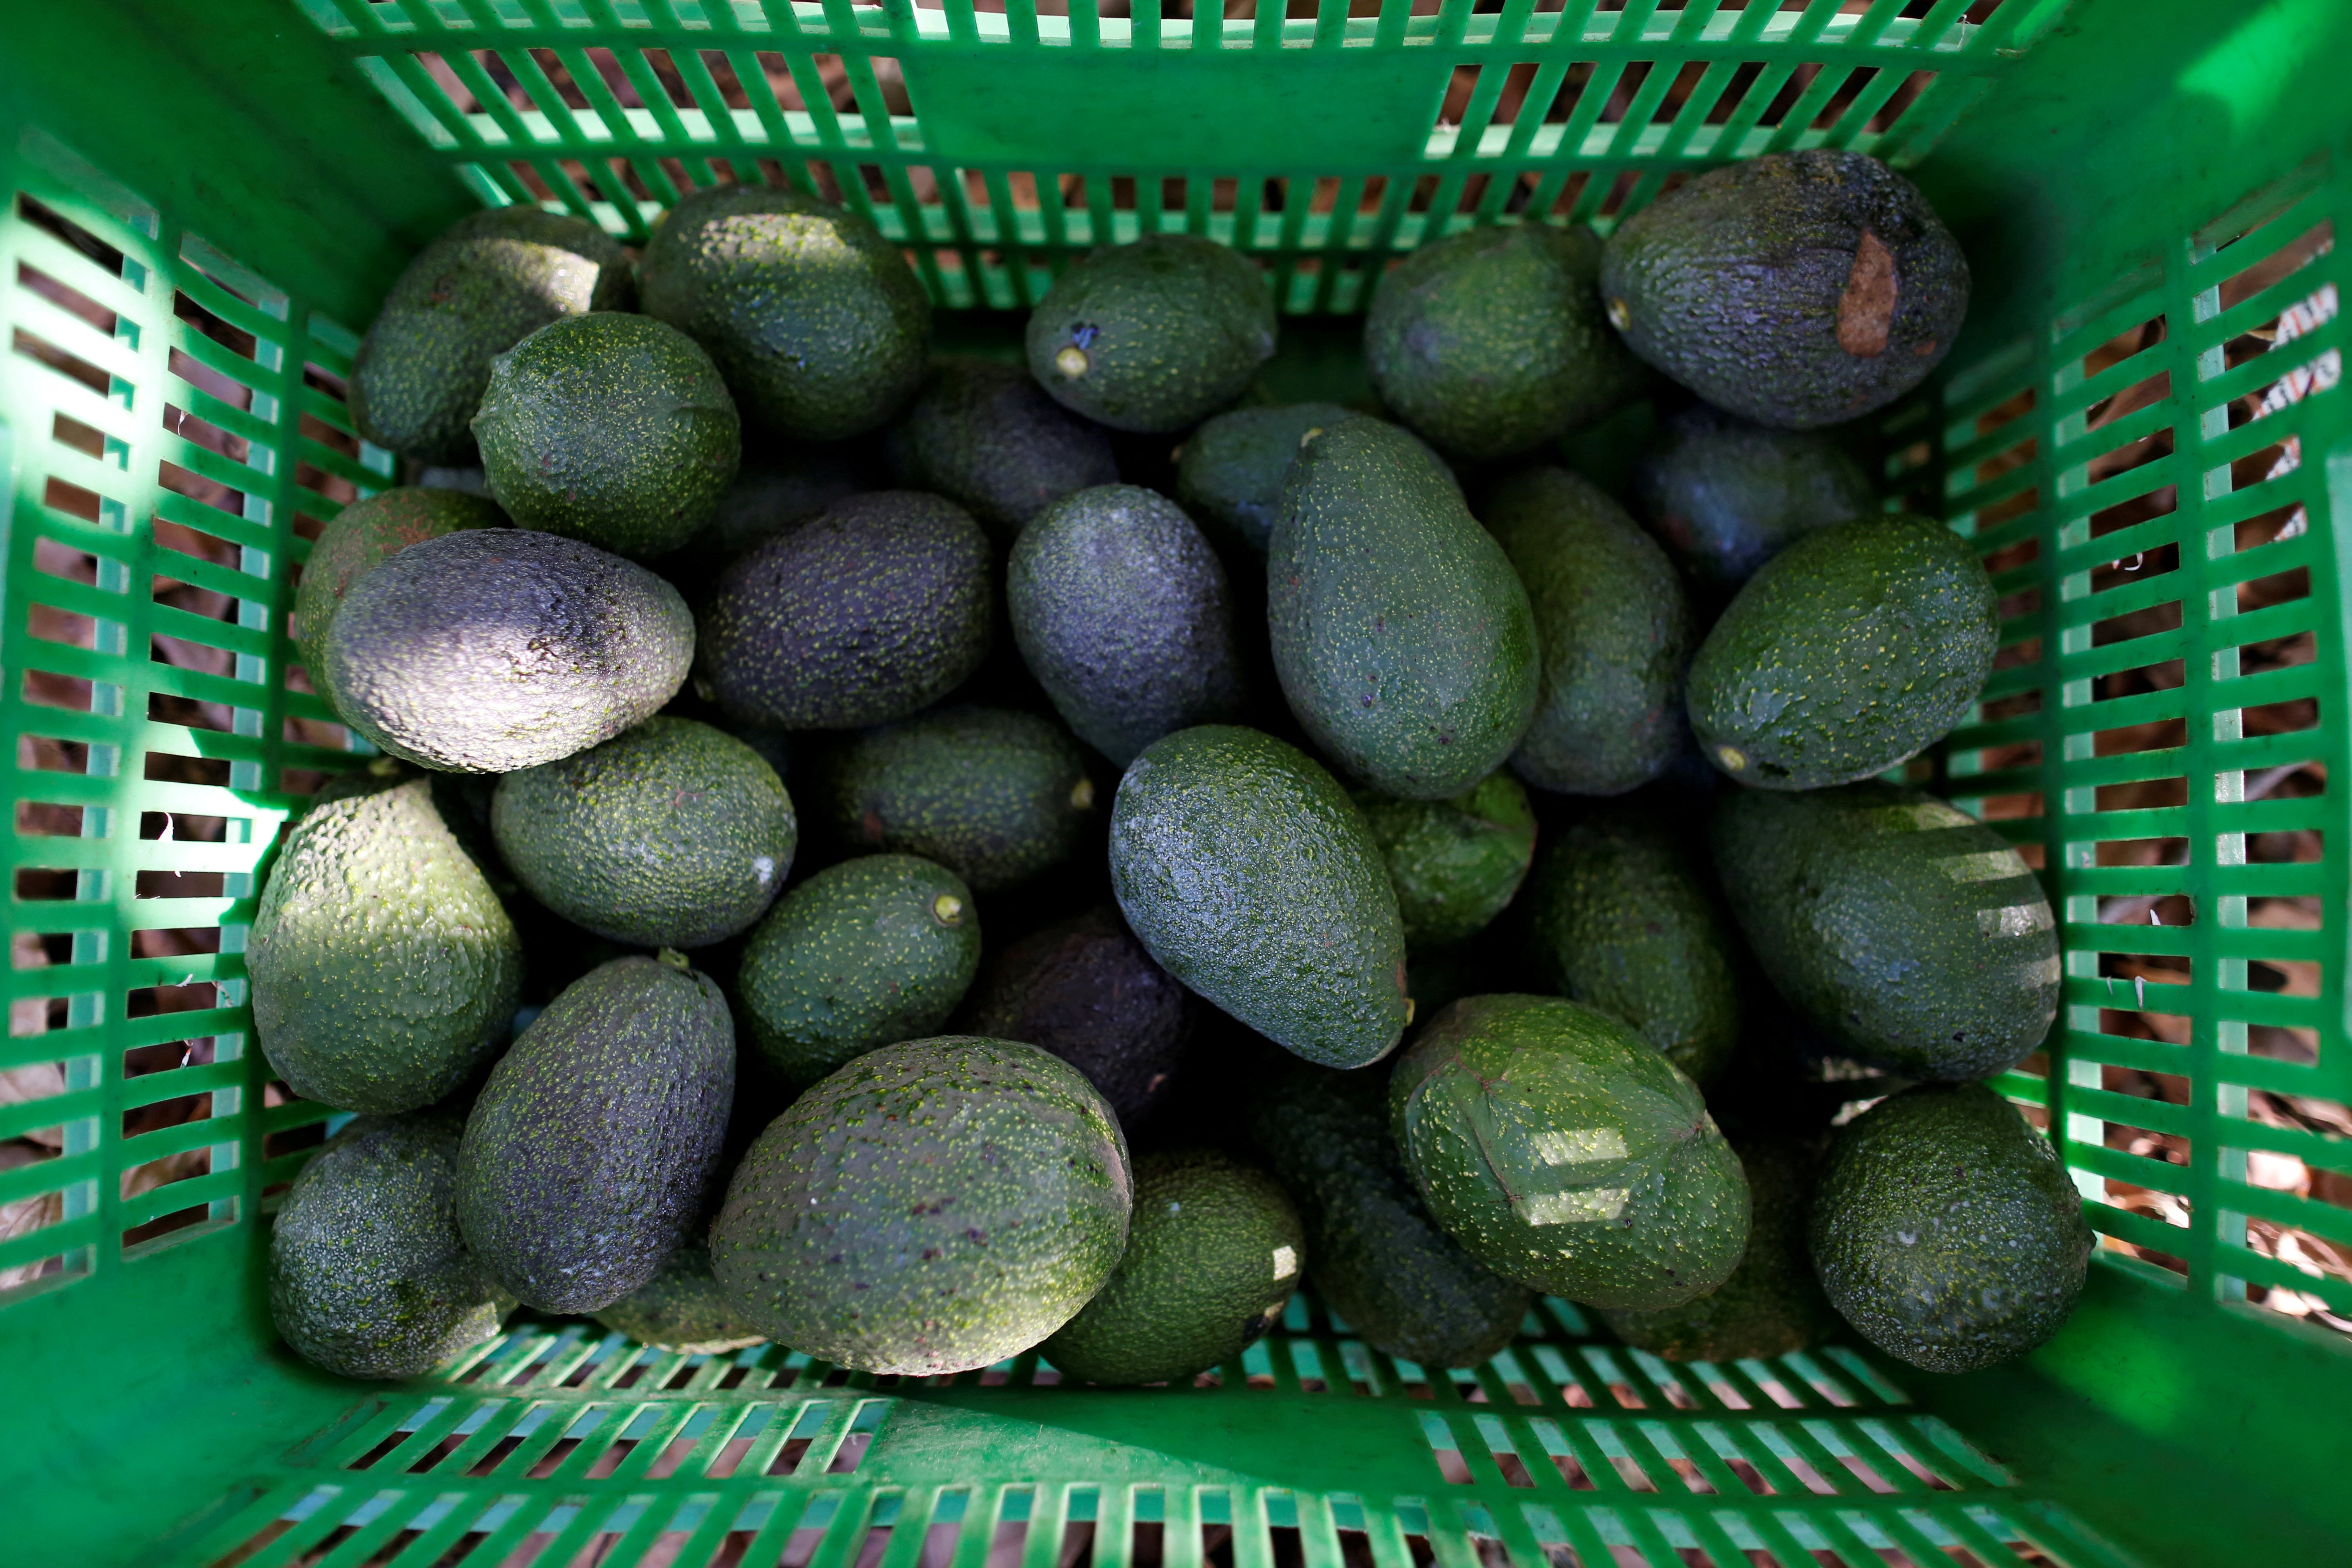 Avocados are pictured in a crate in San Isidro orchard in Uruapan, in Michoacan state, Mexico